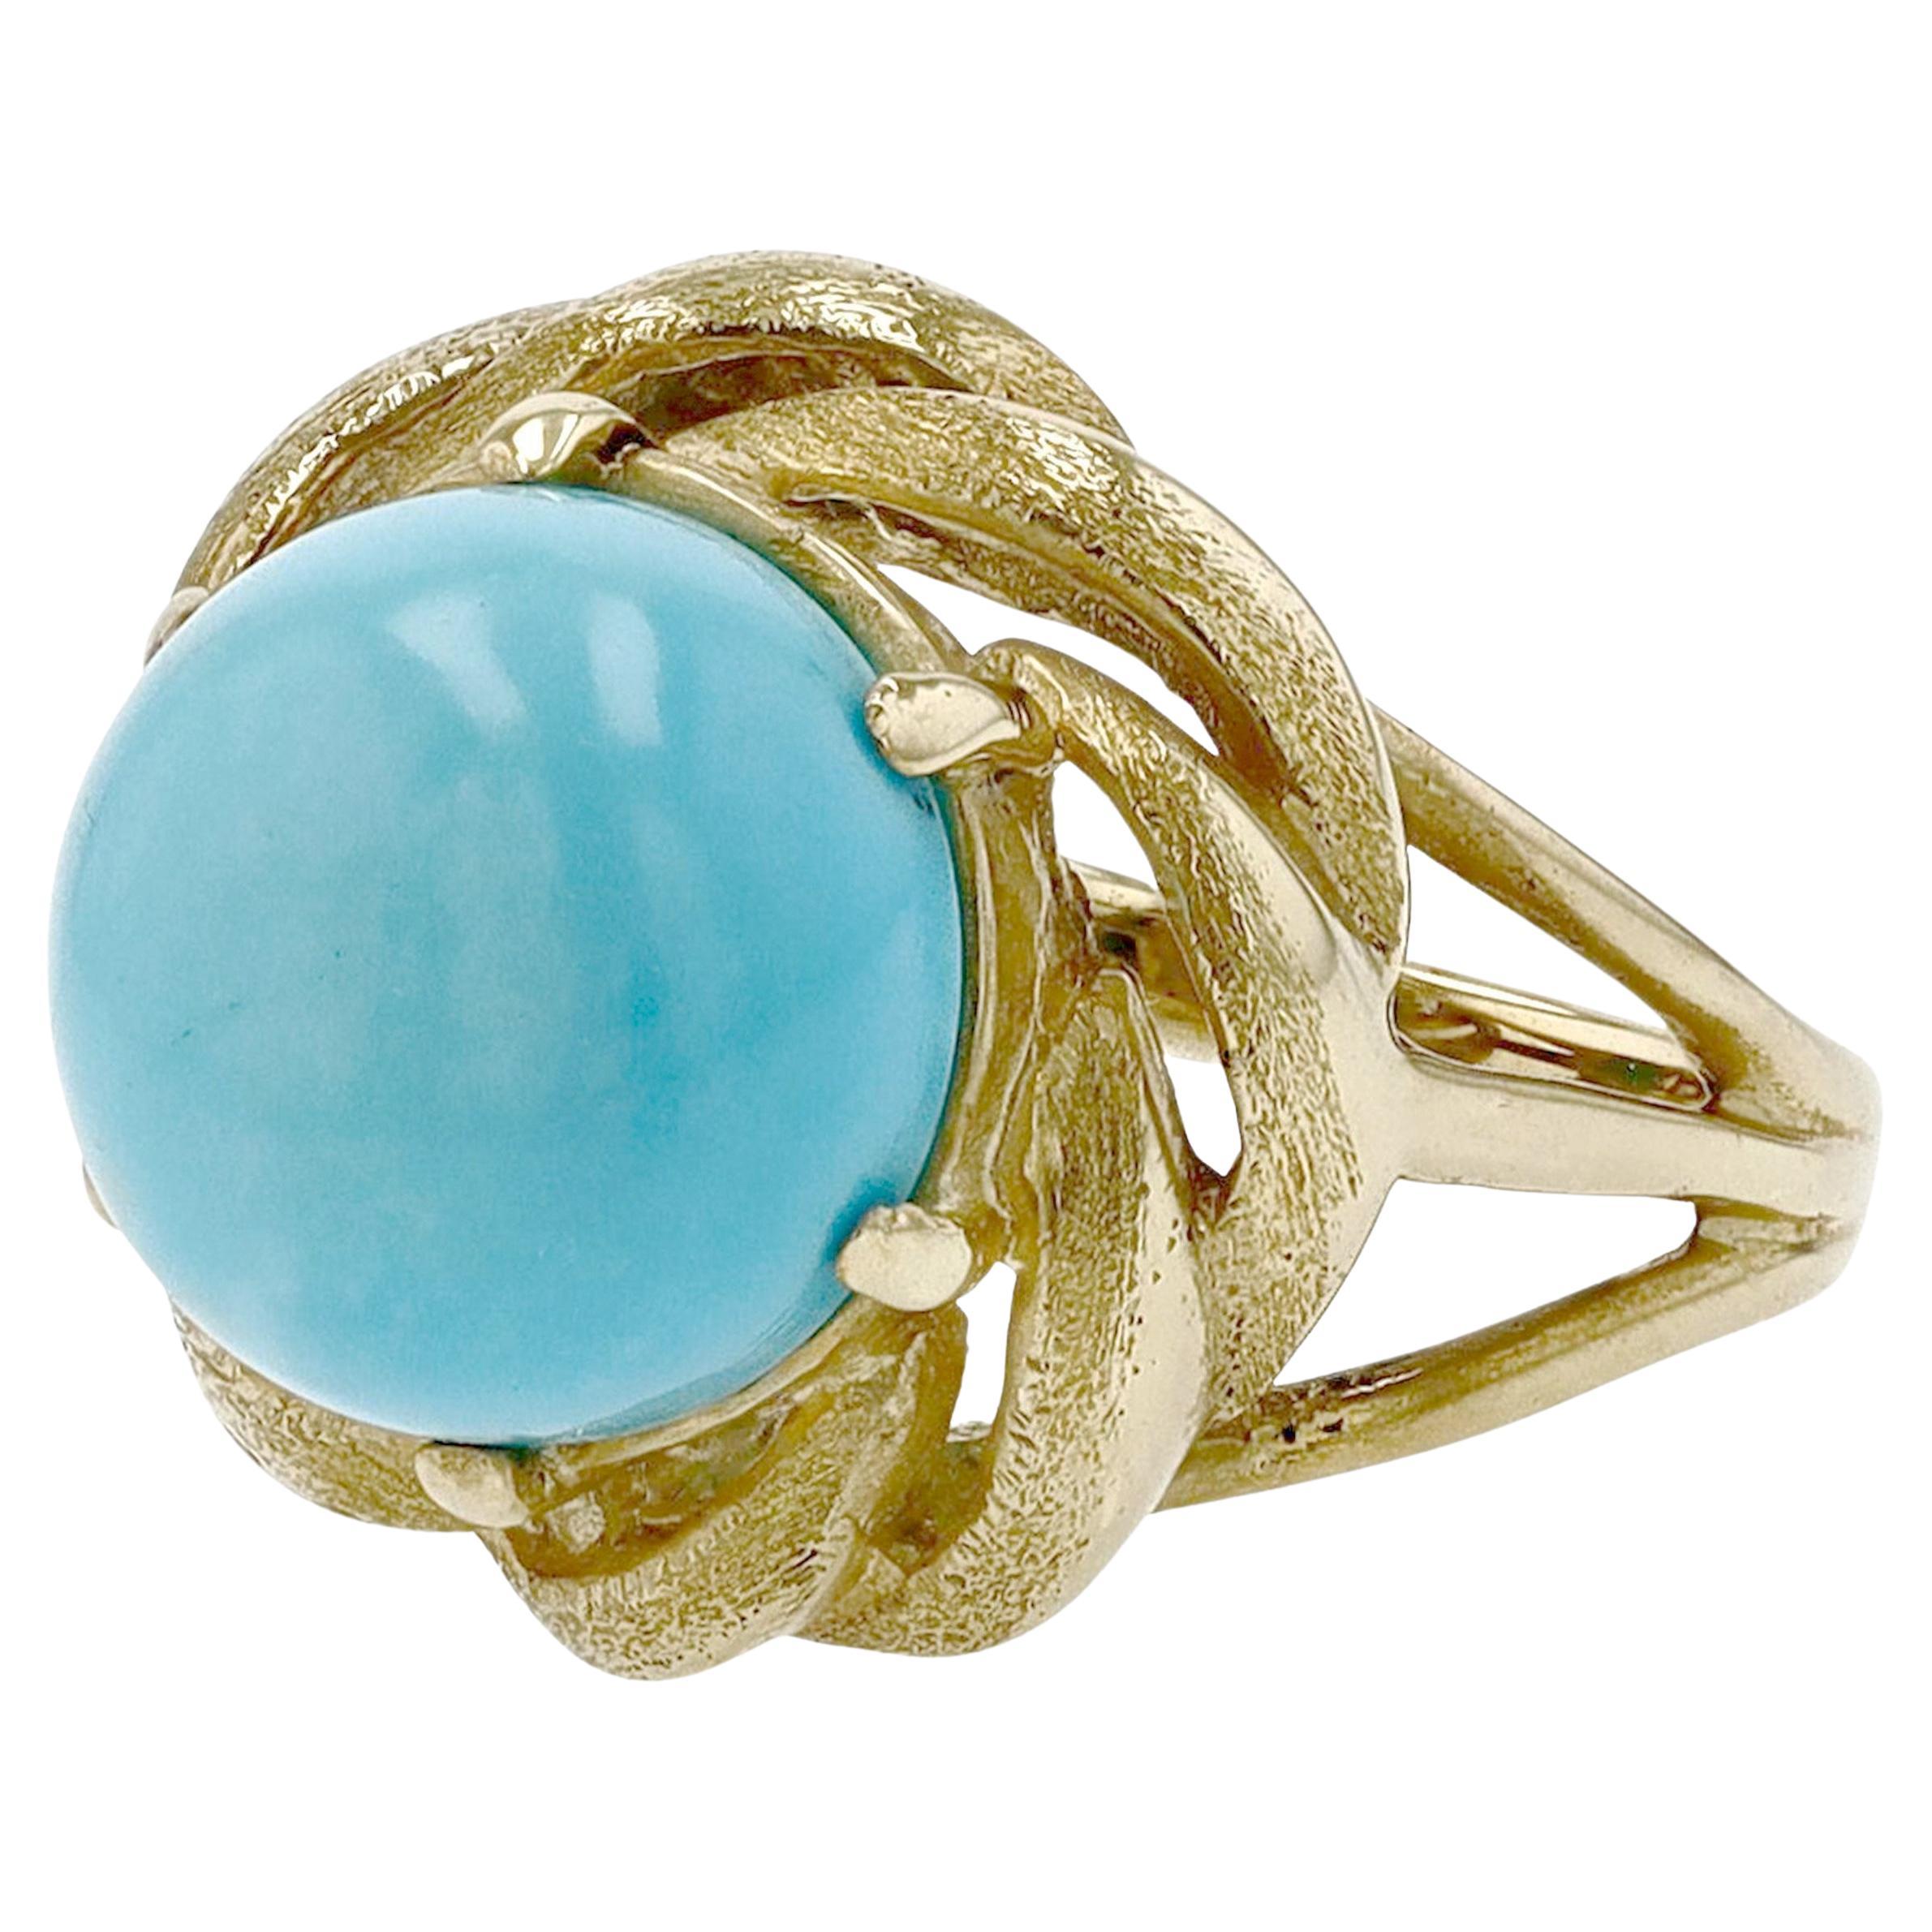 Vintage Retro Sleeping Beauty Turquoise Cocktail Ring For Sale